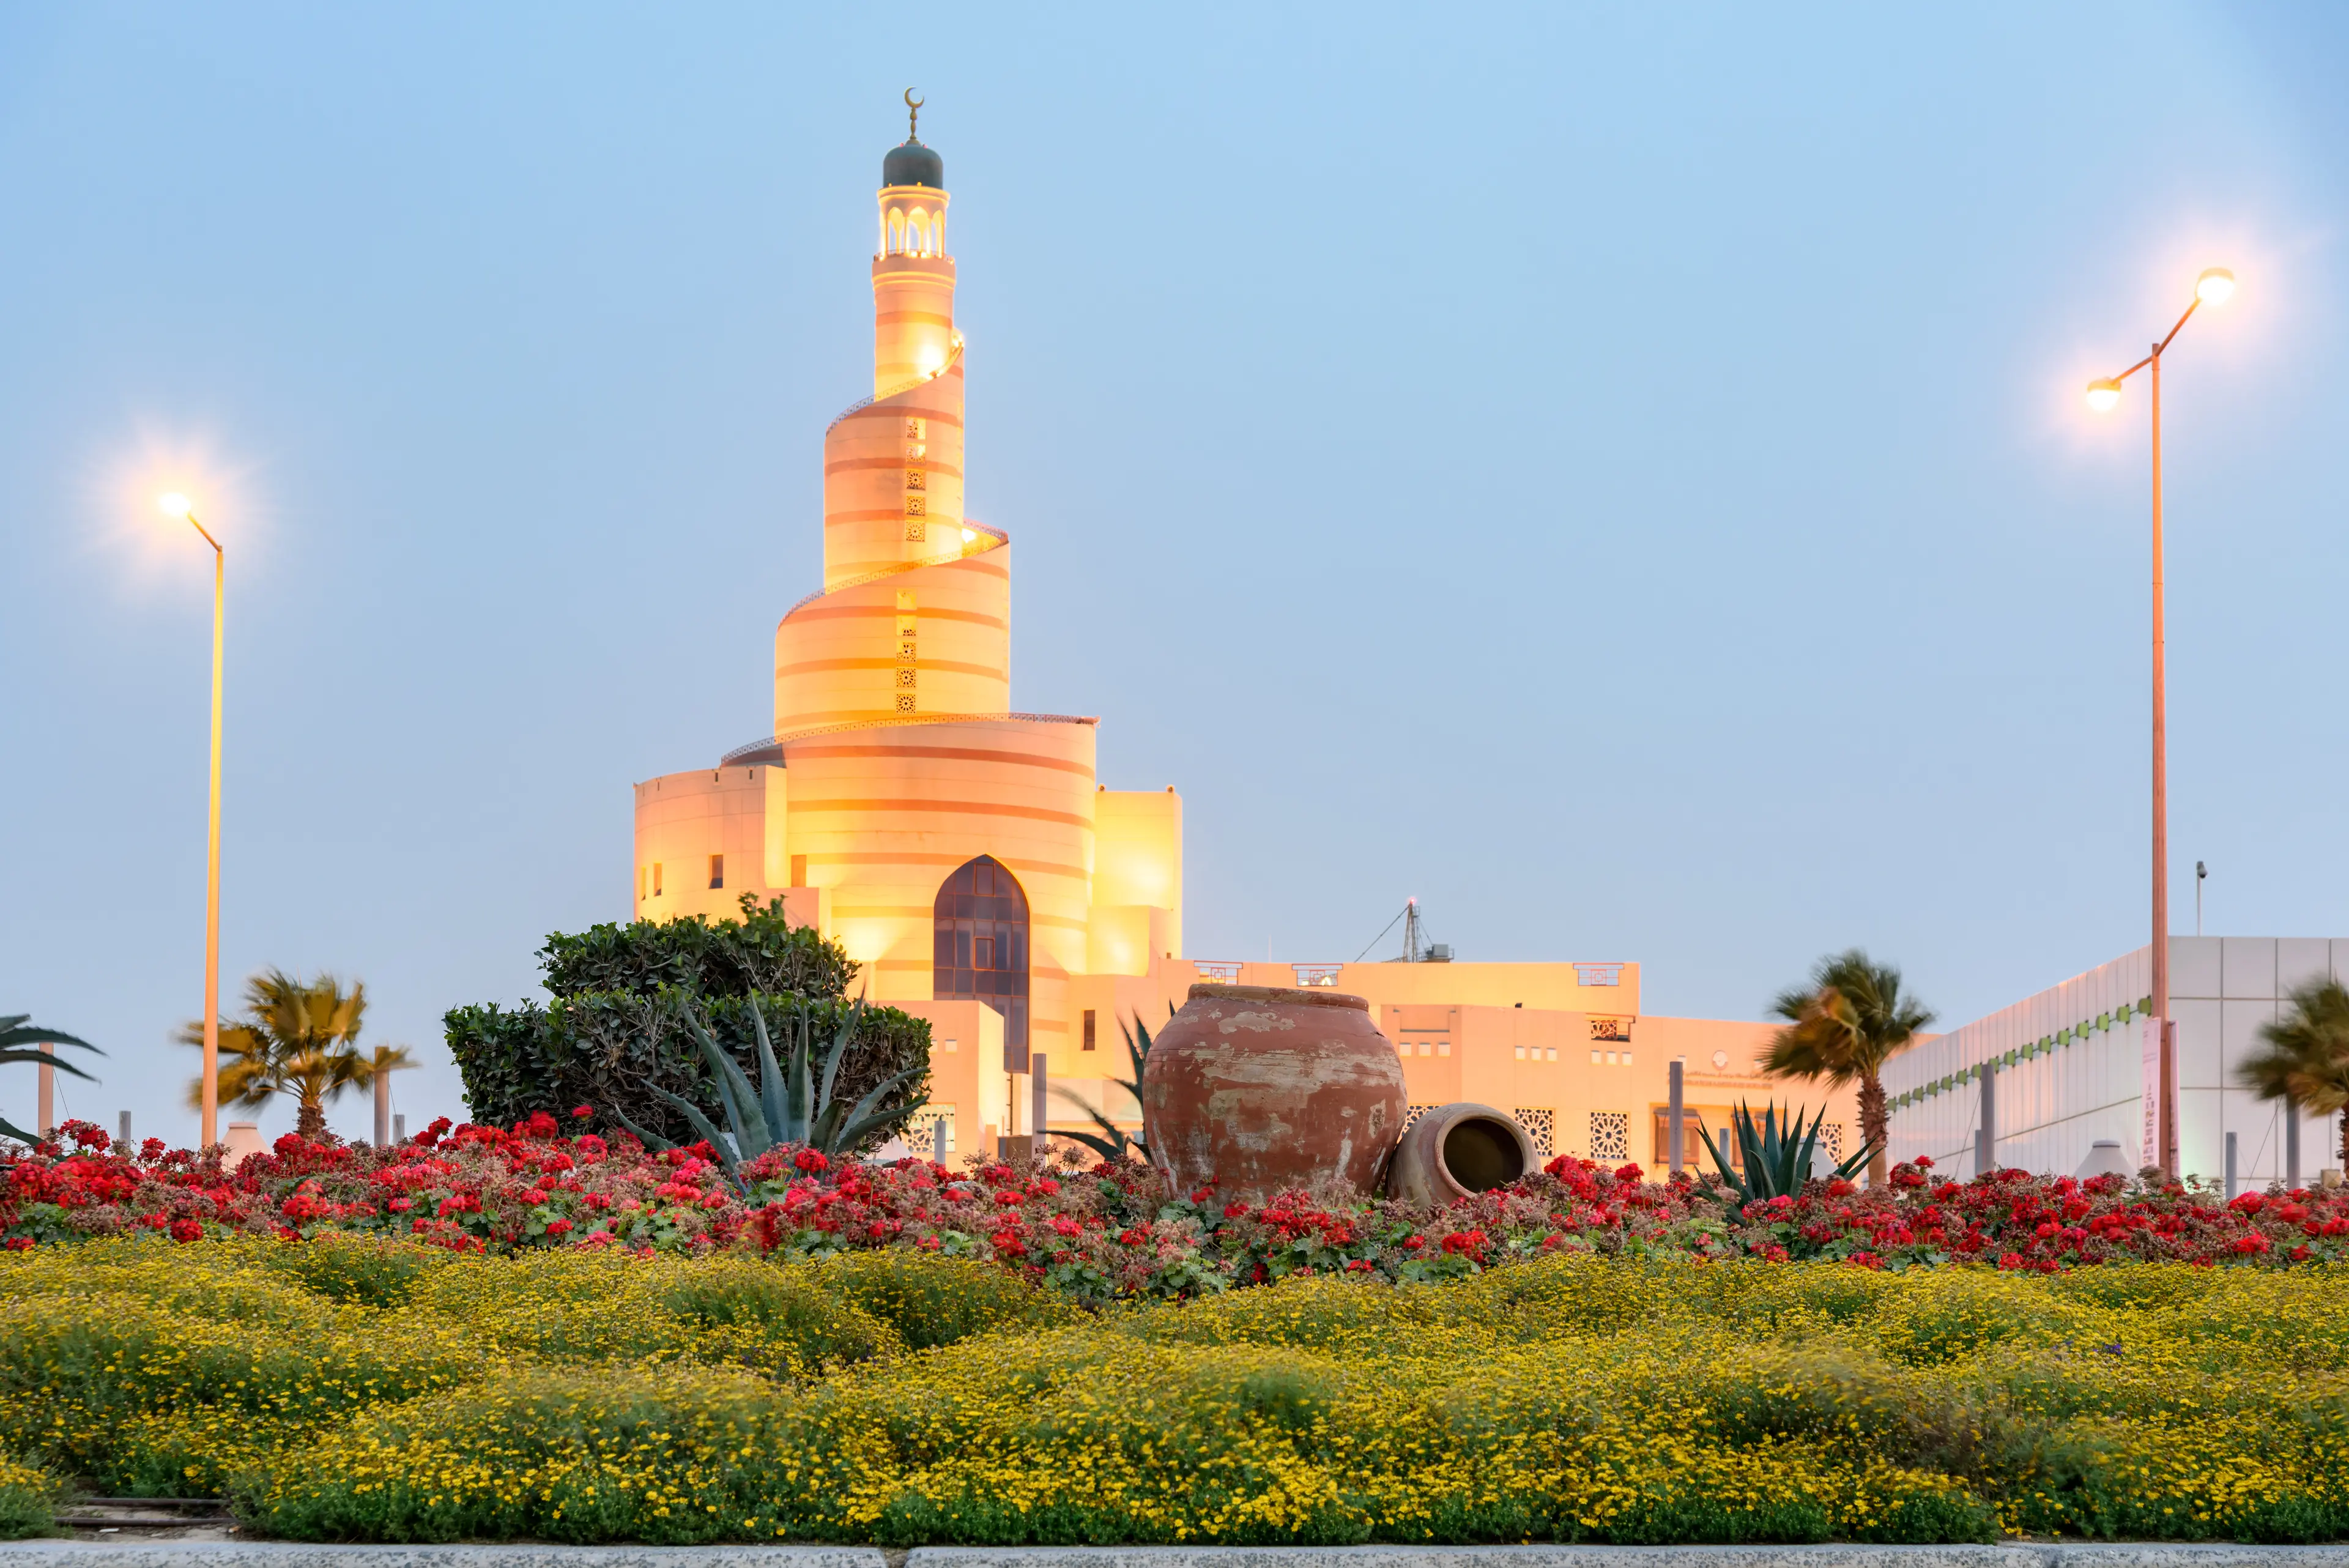 4-Day Local Food, Wine & Shopping Experience with Friends in Doha